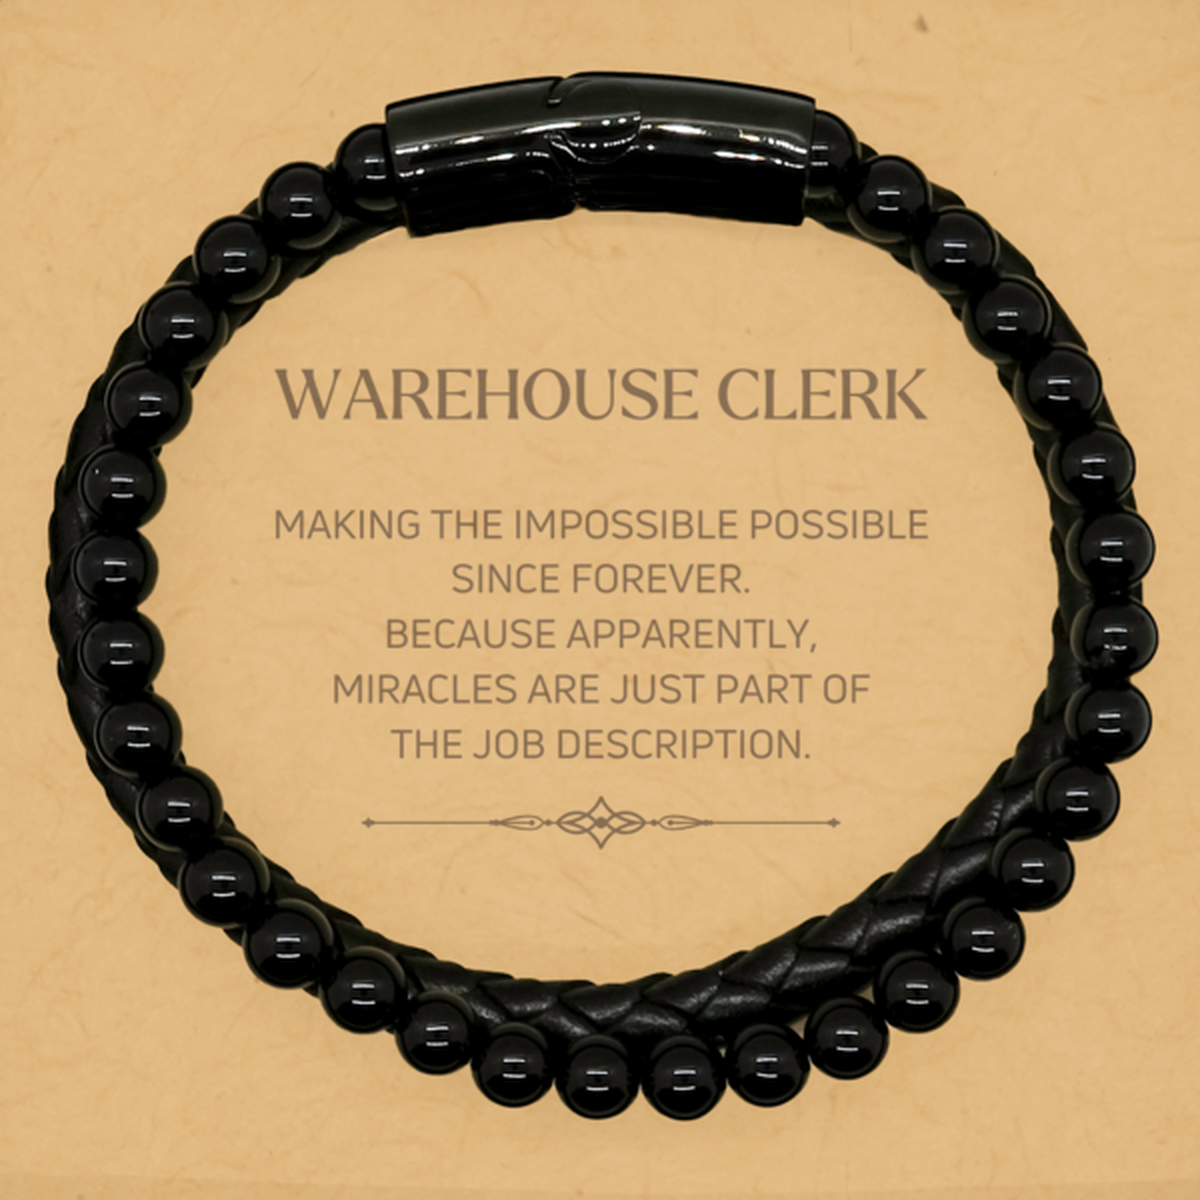 Funny Warehouse Clerk Gifts, Miracles are just part of the job description, Inspirational Birthday Stone Leather Bracelets For Warehouse Clerk, Men, Women, Coworkers, Friends, Boss